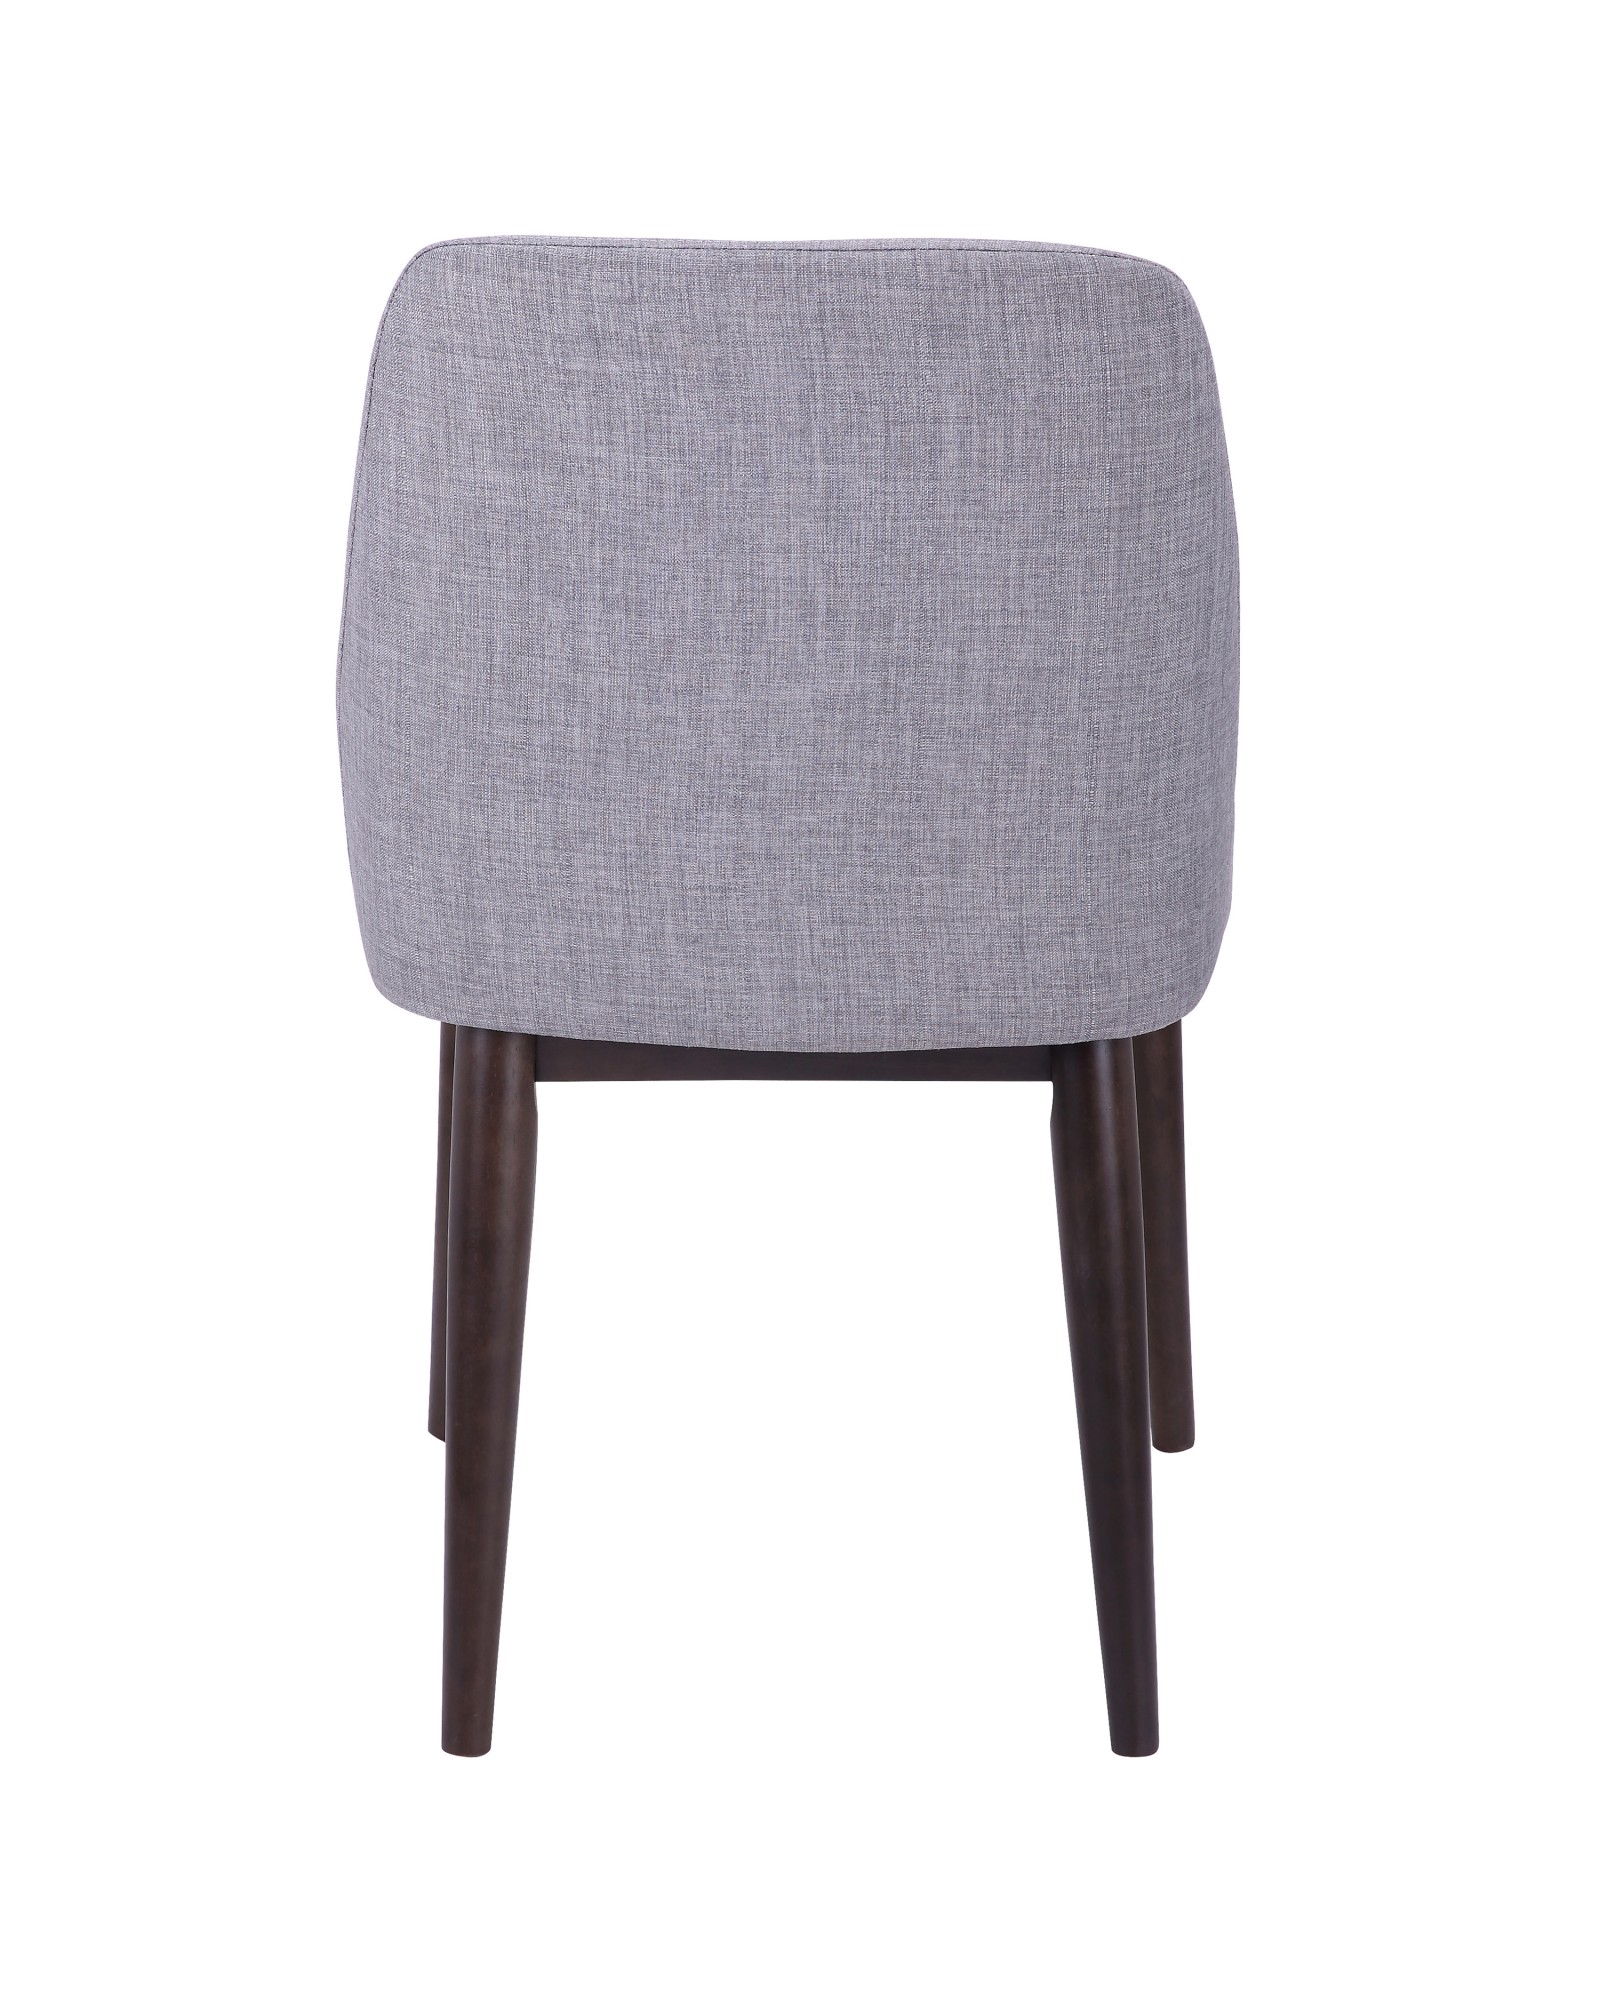 Tintori Contemporary Dining Chair in Walnut and Light Grey Fabric - Set of 2